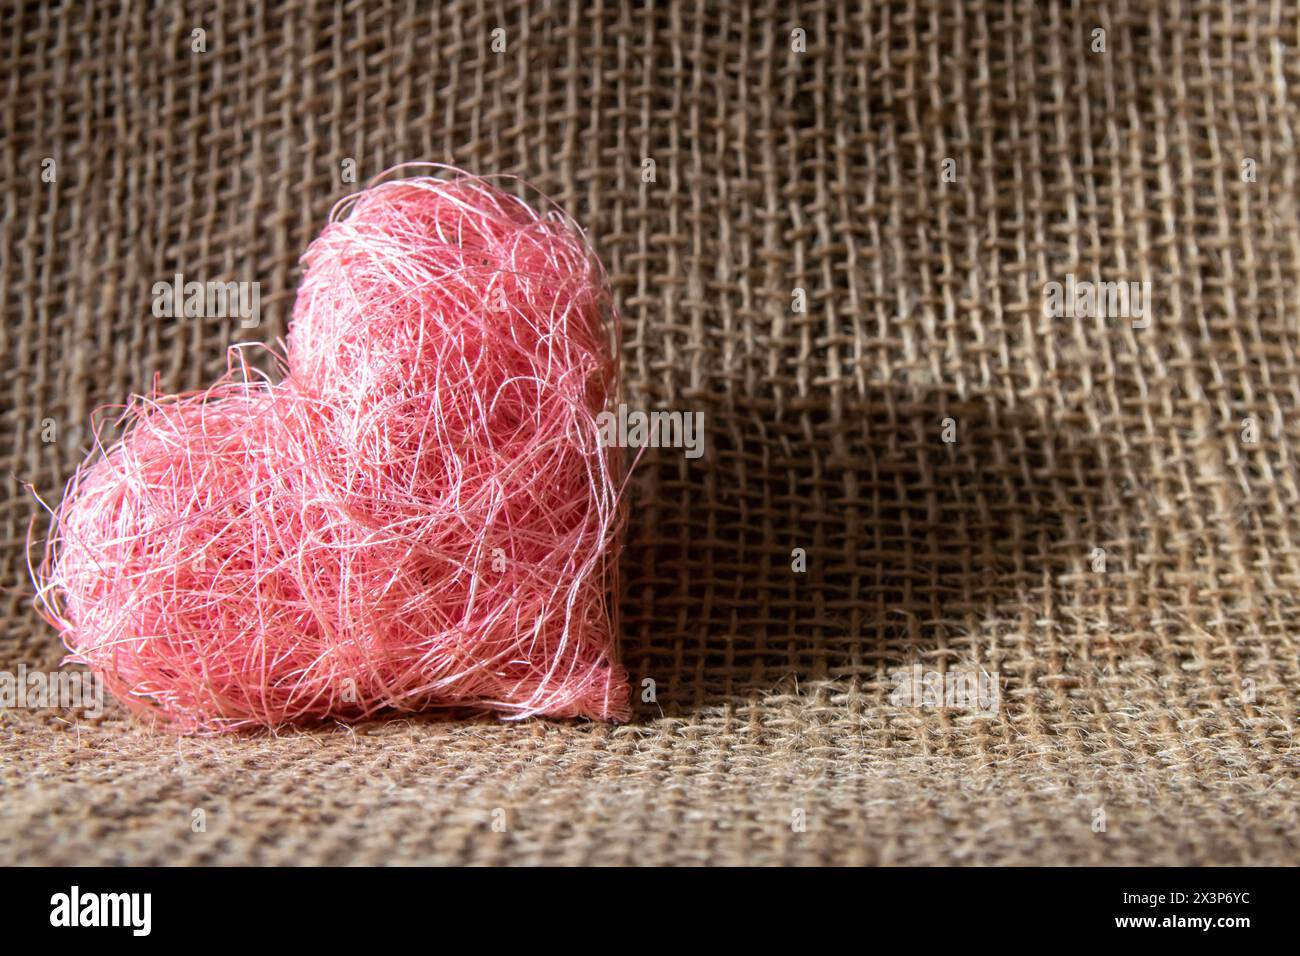 Beautiful pink heart shape made of material fabric on a rustic natural background. Concept of Valentine's day and romantic love. Stock Photo